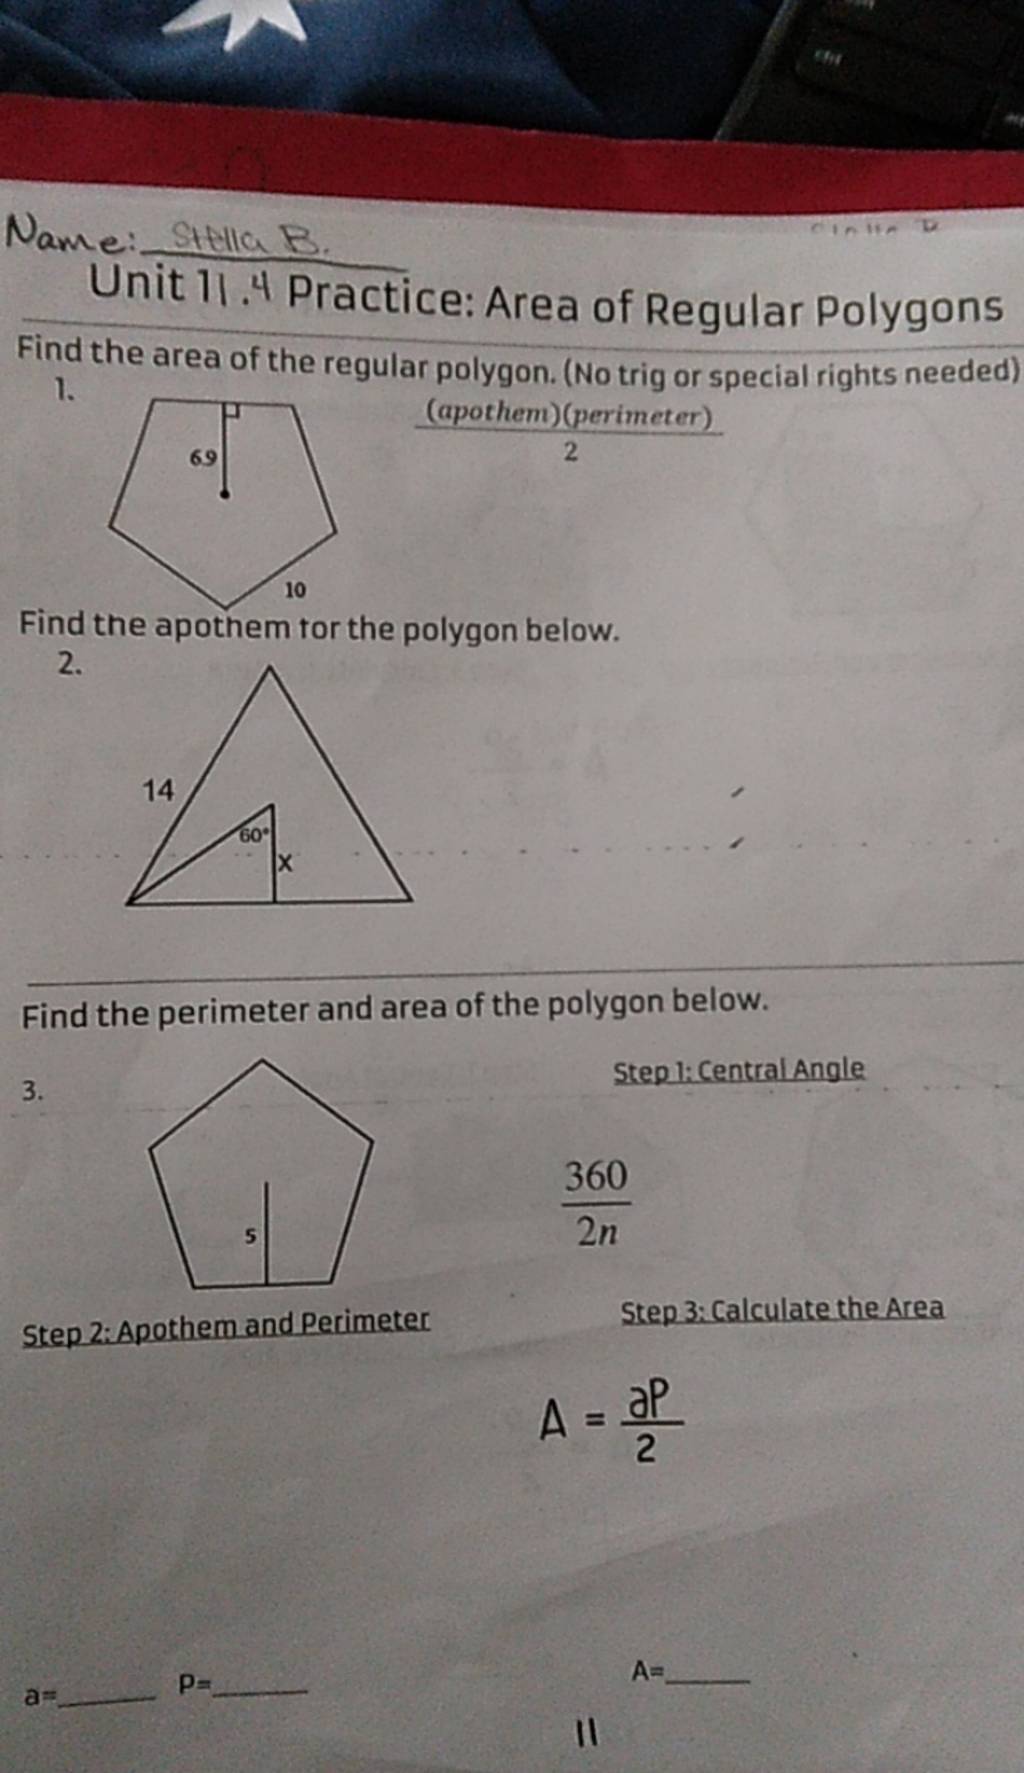 Name: Stella B.
Unit 11.4 Practice: Area of Regular Polygons
Find the 